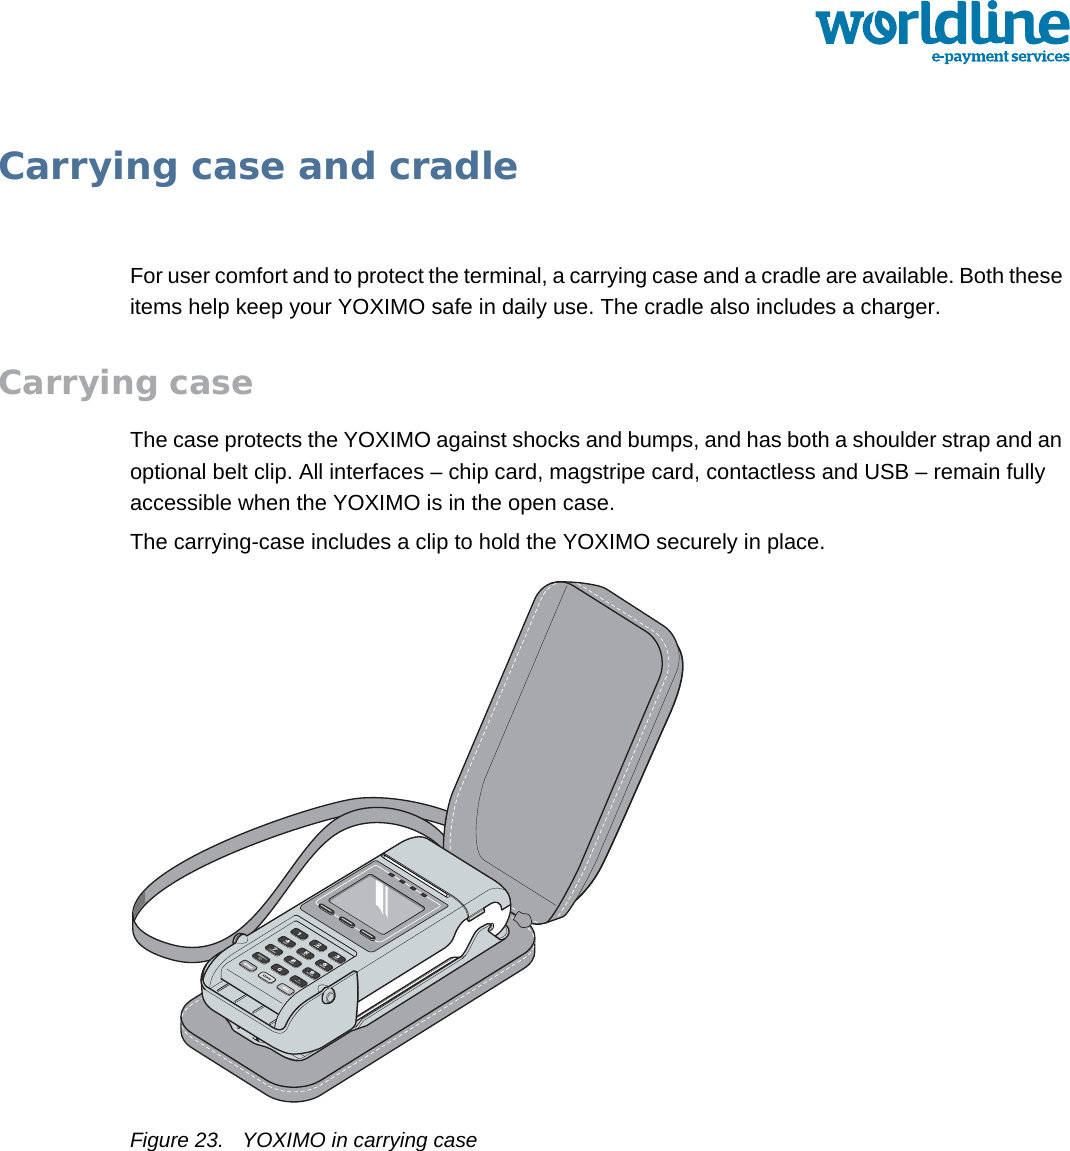 public 23om_yxm_accessories.fm document release 1.1 last updated 30/9/15Carrying case and cradleFor user comfort and to protect the terminal, a carrying case and a cradle are available. Both these items help keep your YOXIMO safe in daily use. The cradle also includes a charger.Carrying caseThe case protects the YOXIMO against shocks and bumps, and has both a shoulder strap and an optional belt clip. All interfaces – chip card, magstripe card, contactless and USB – remain fully accessible when the YOXIMO is in the open case.The carrying-case includes a clip to hold the YOXIMO securely in place.Figure 23. YOXIMO in carrying case